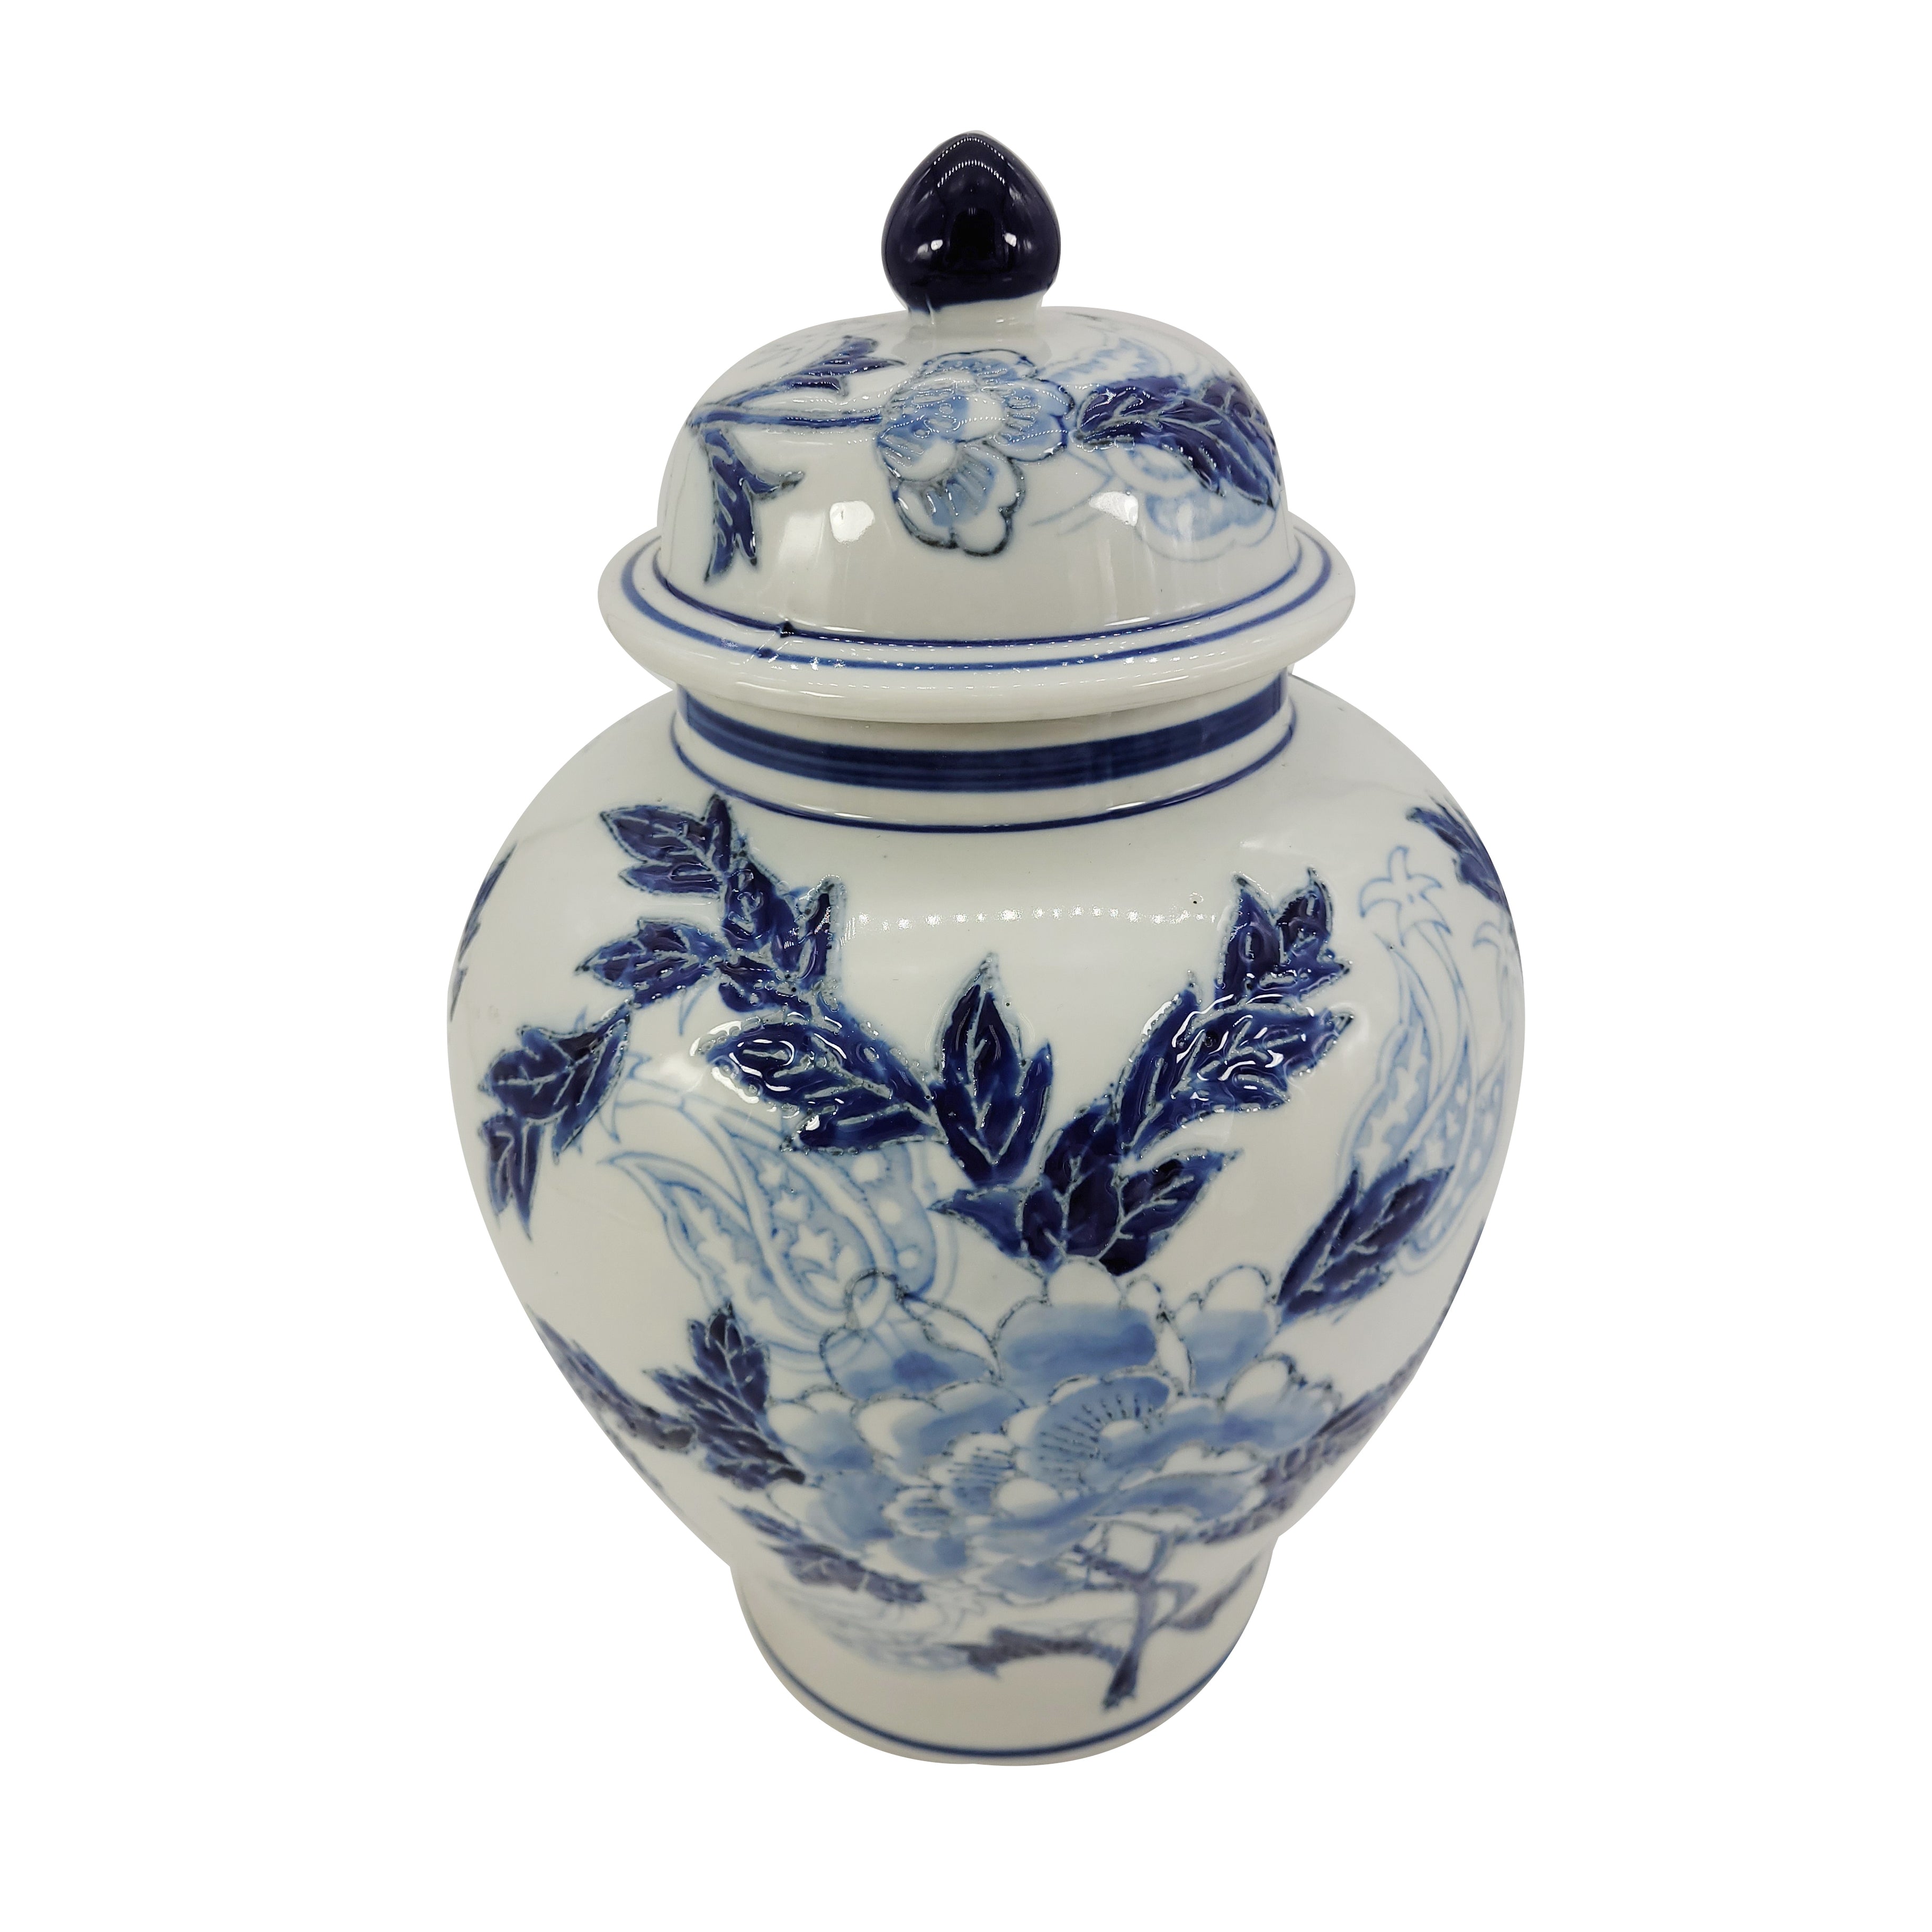 10" Blue and White Chinoiserie Jar